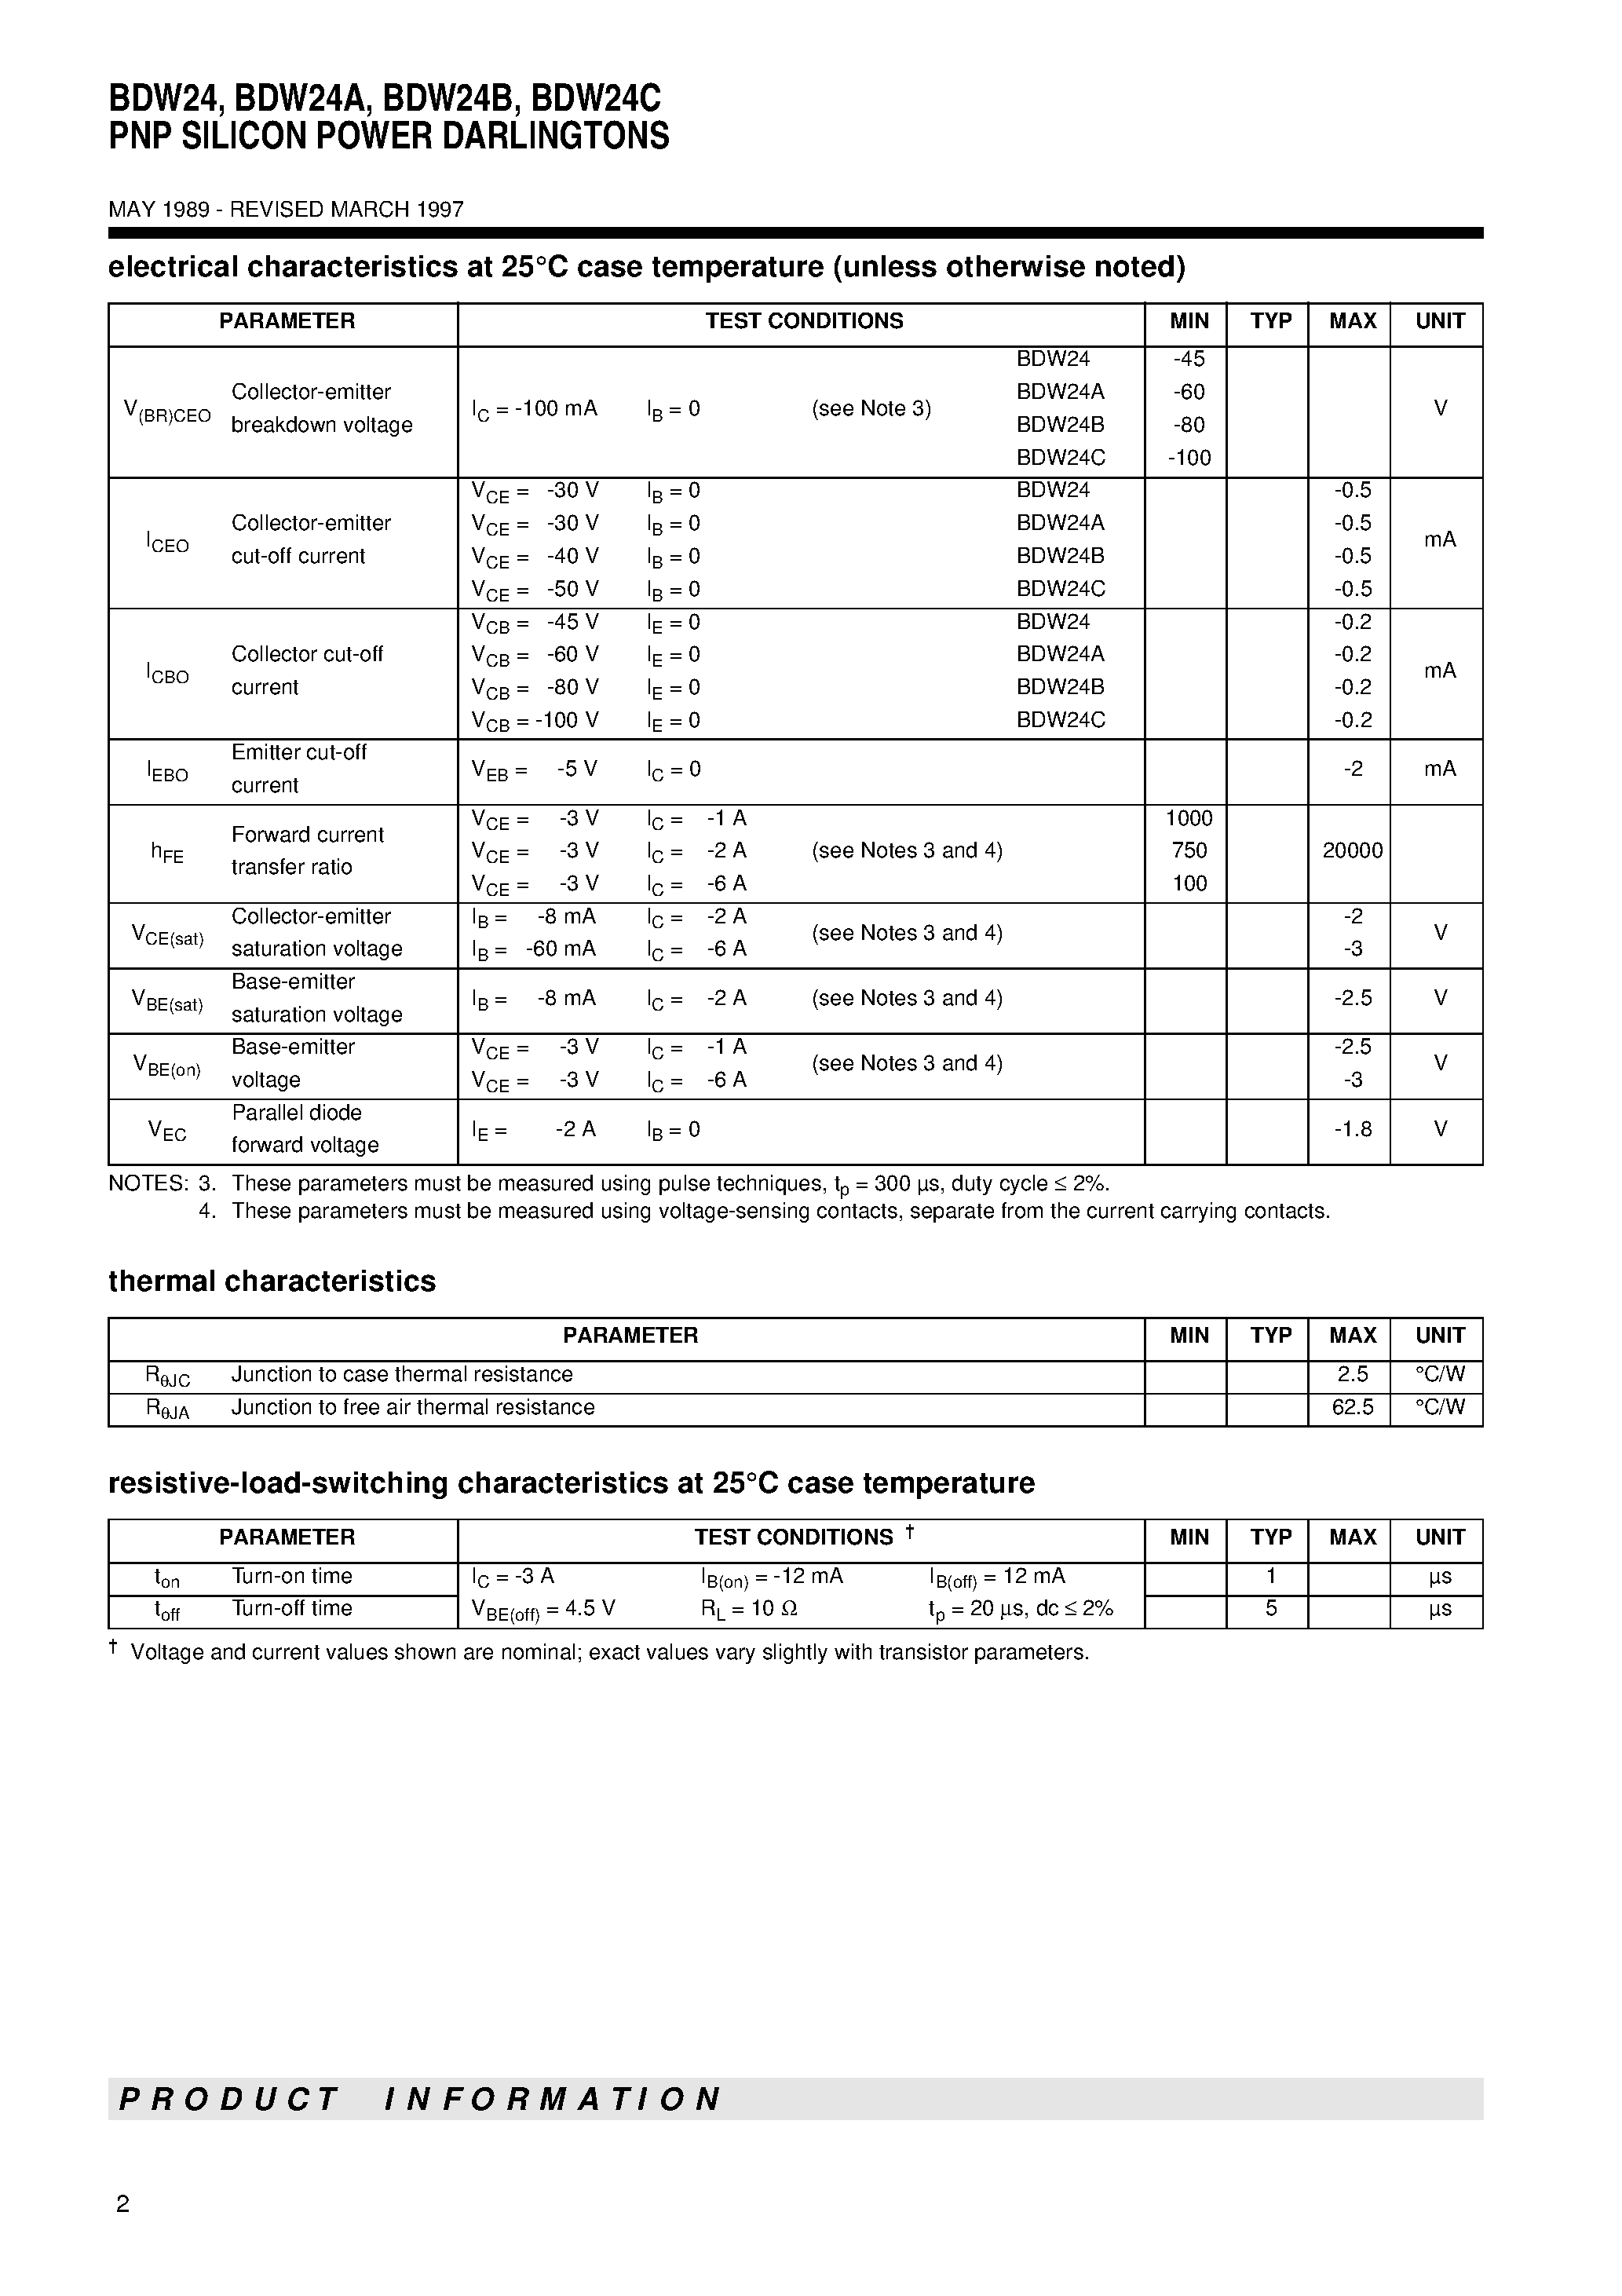 Datasheet BDW24C - PNP SILICON POWER DARLINGTONS page 2